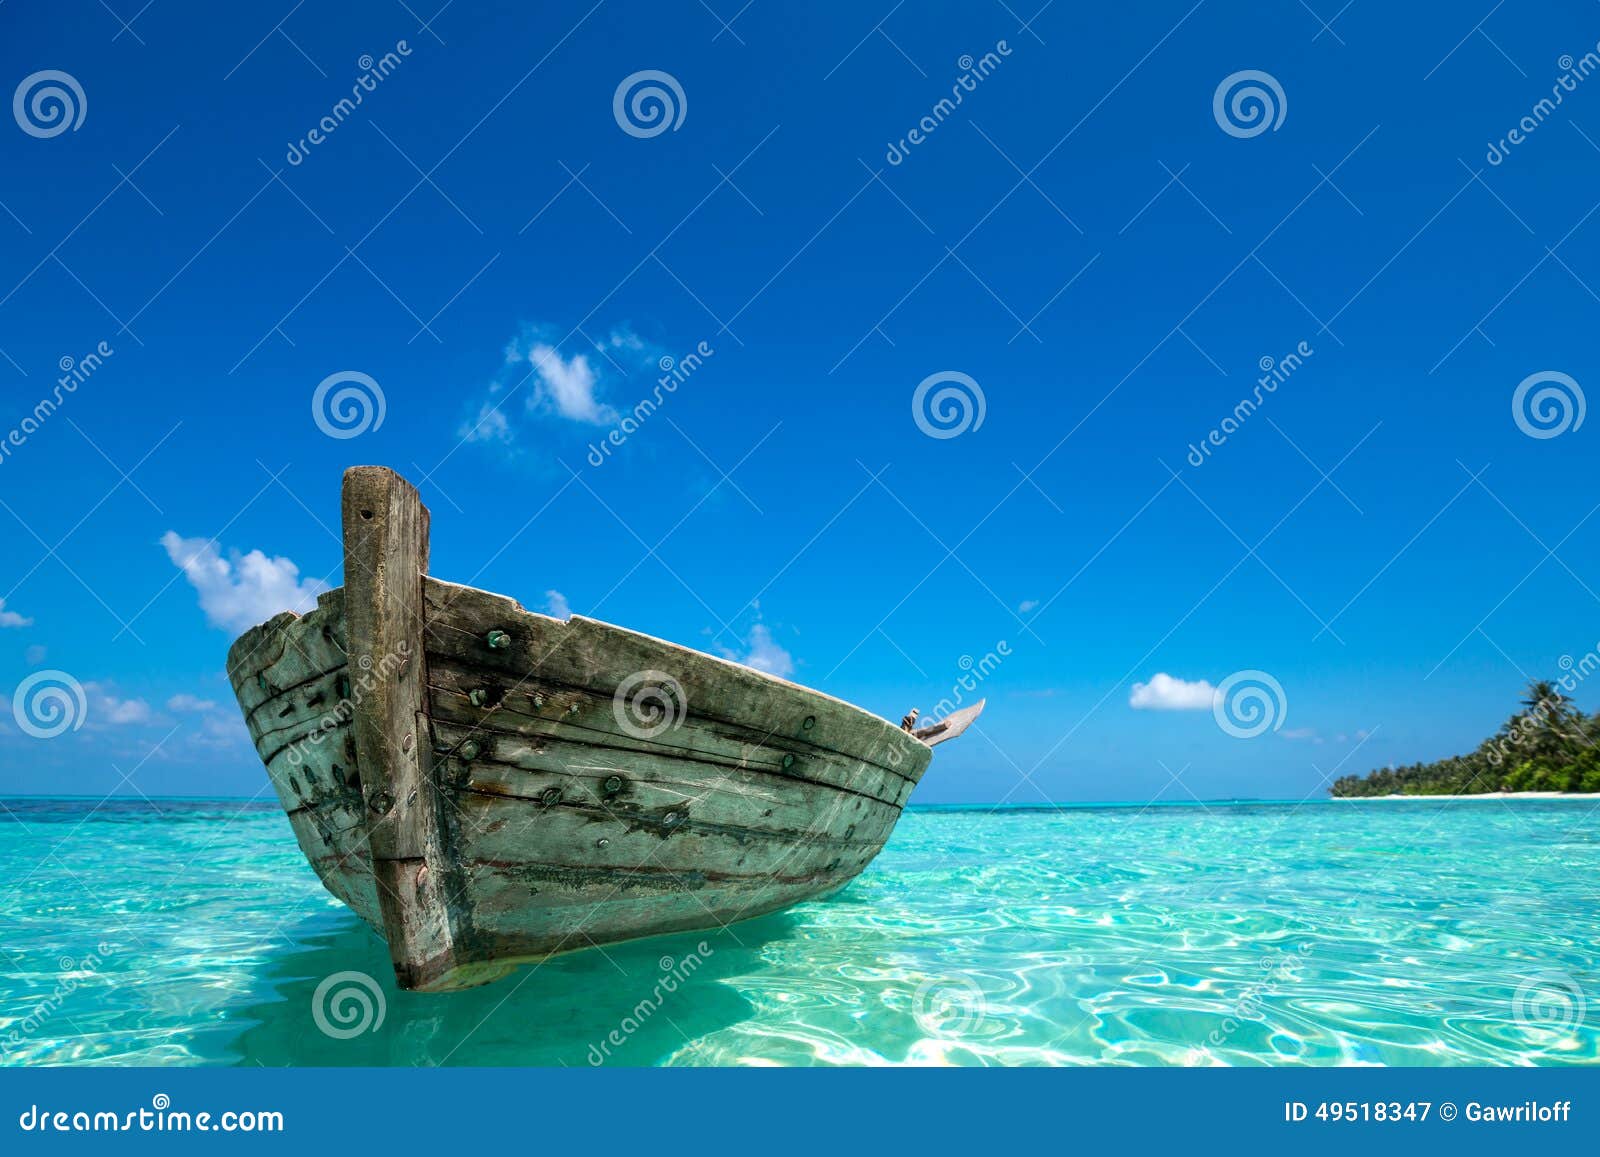 perfect tropical island paradise beach and old boat